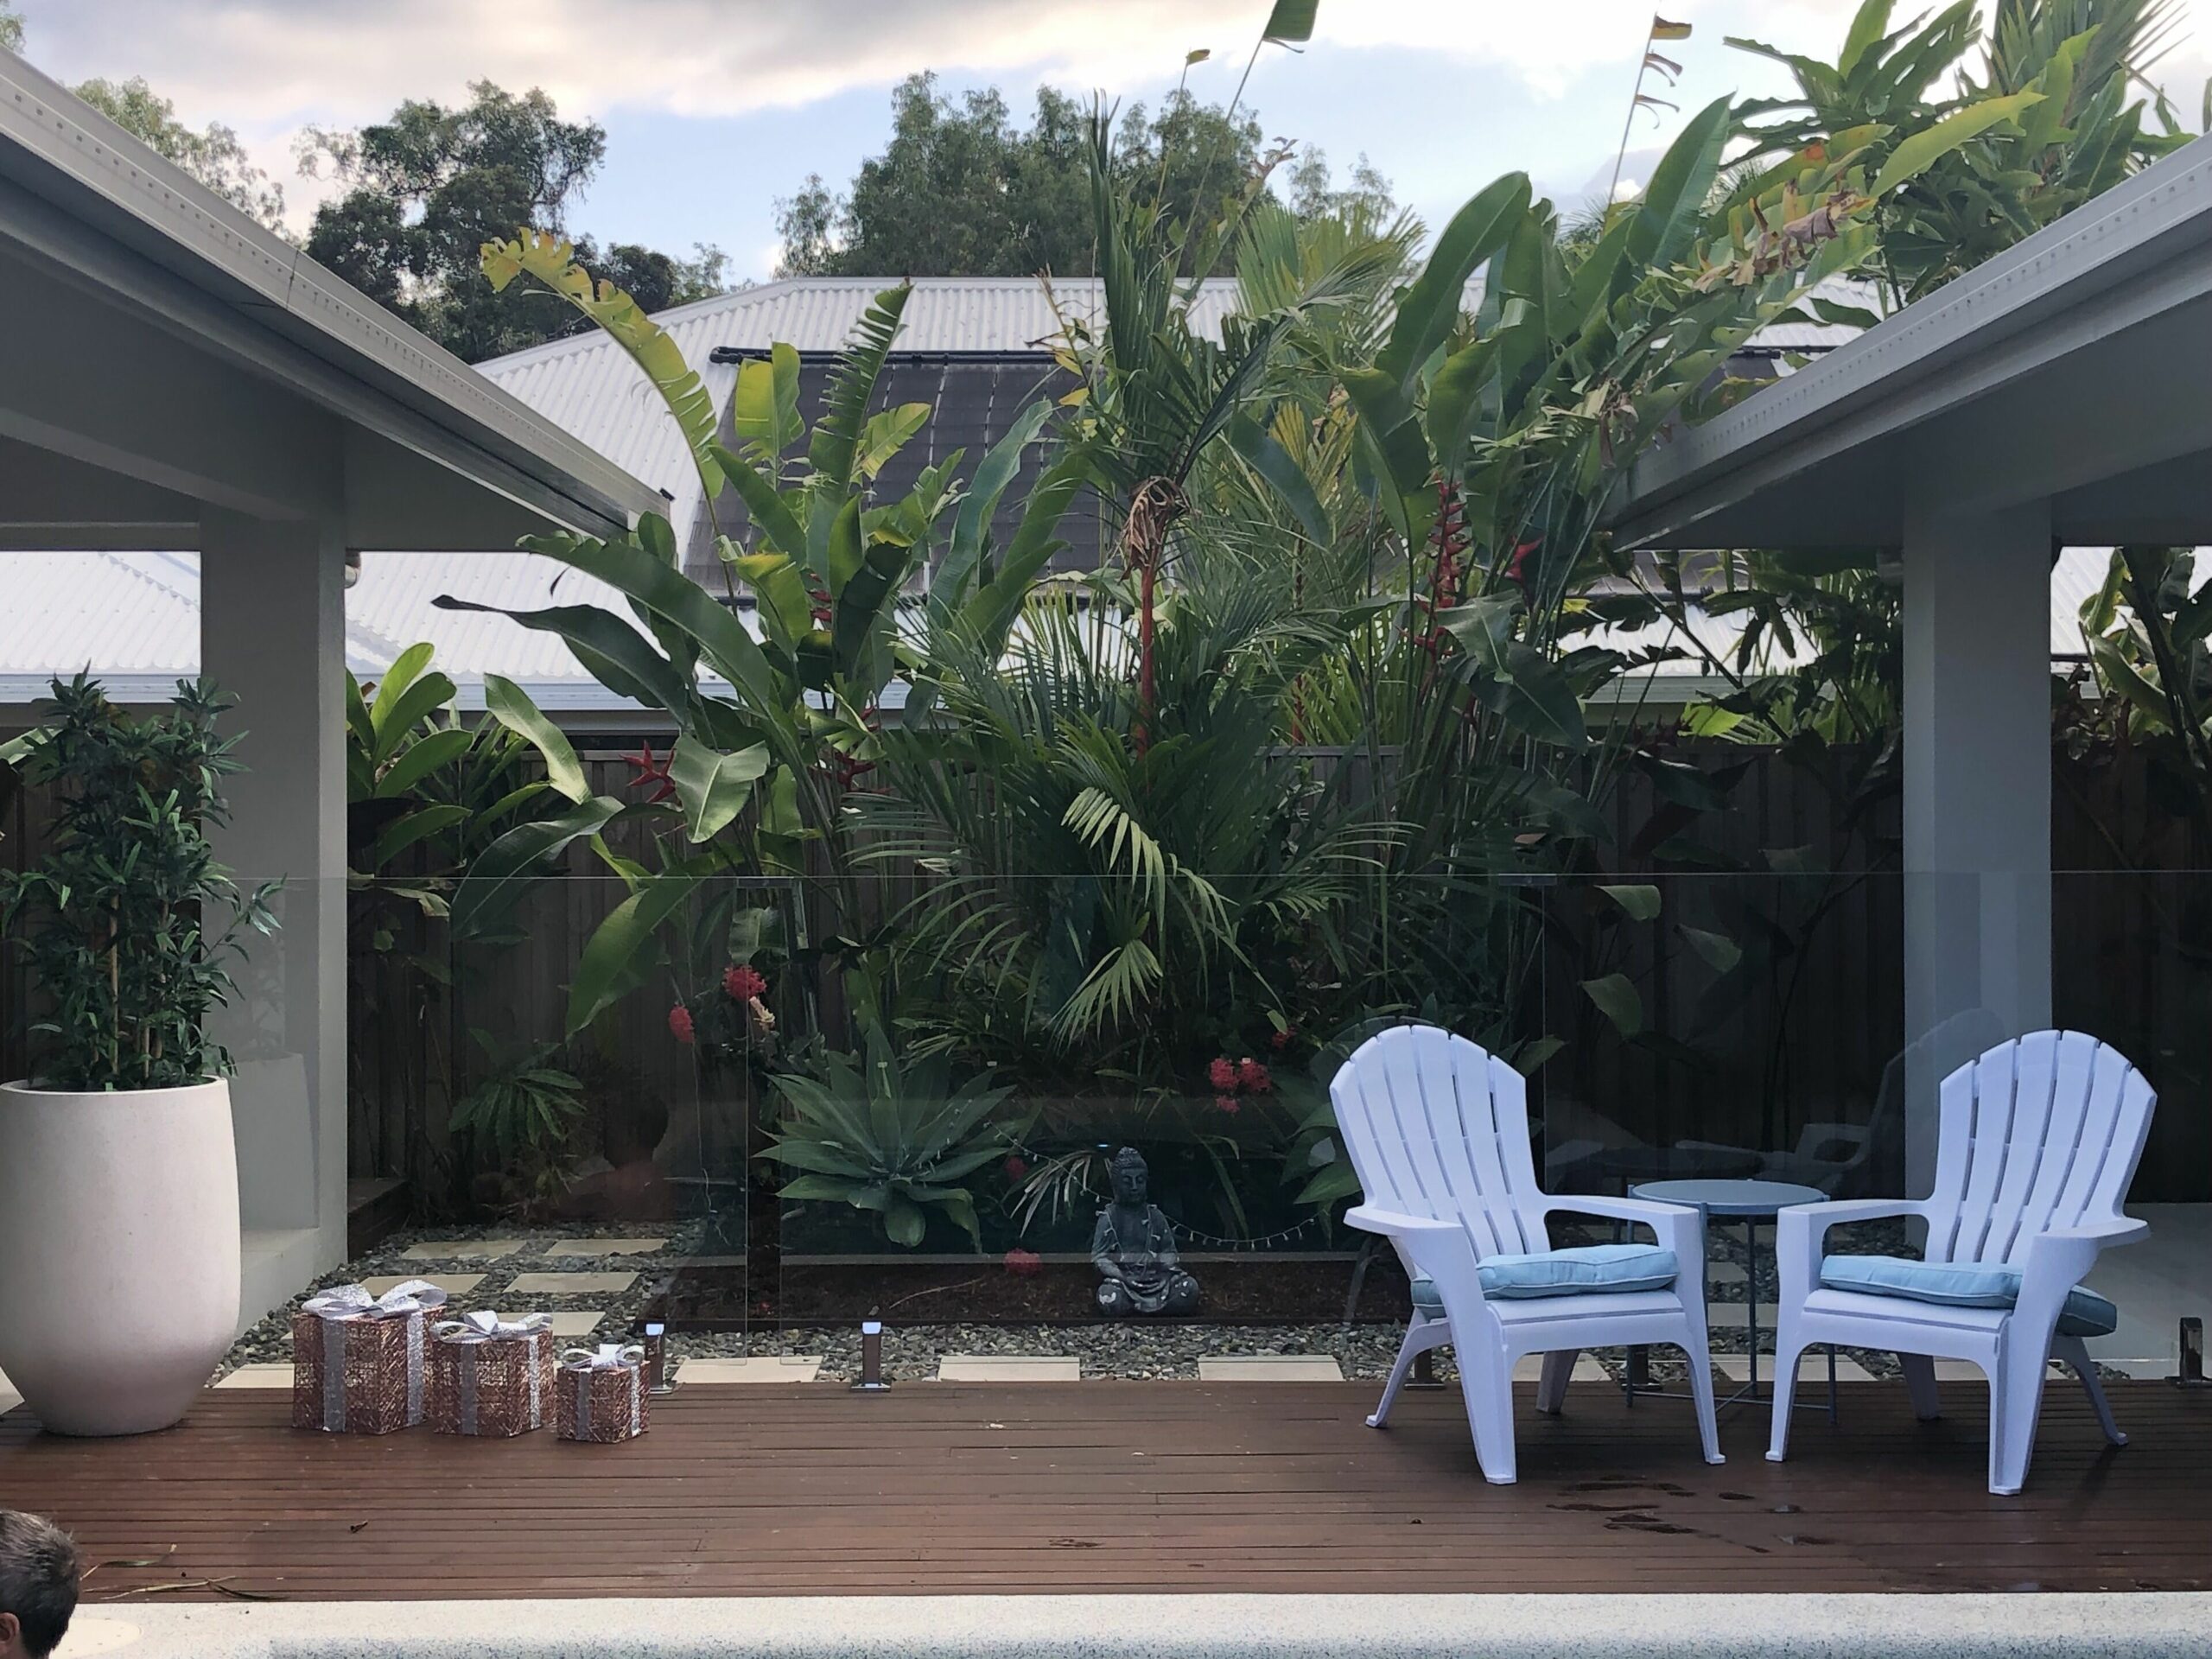 Private pool oasis in Palm Cove